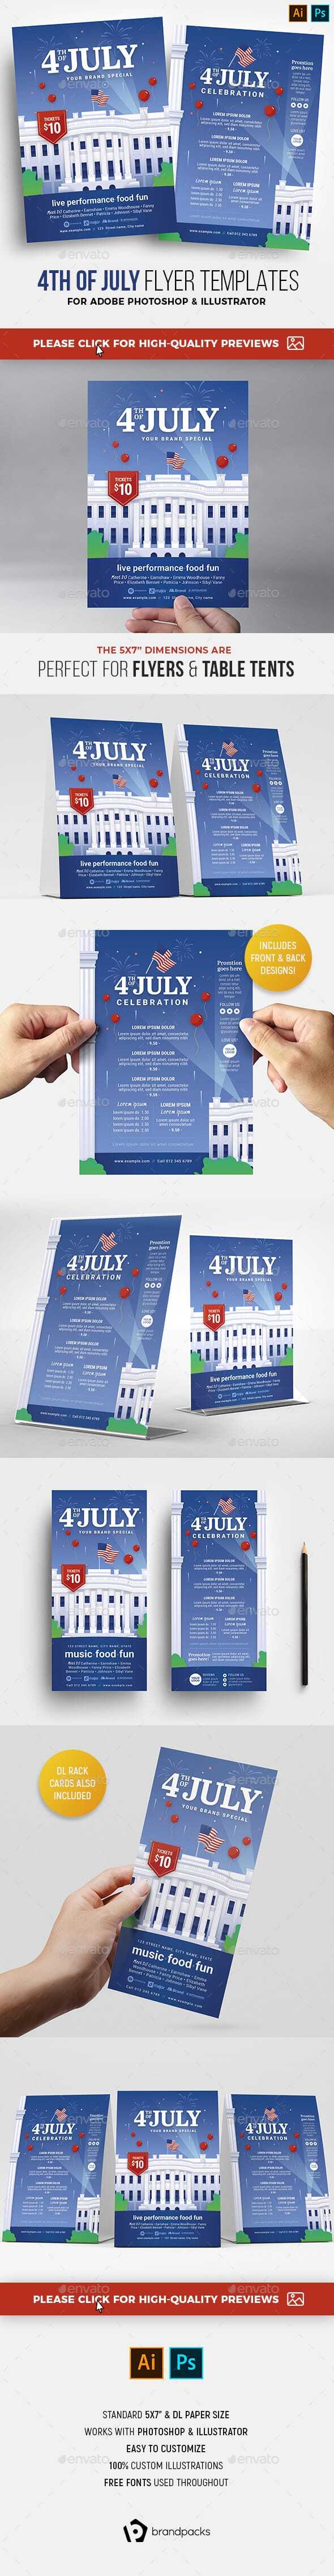 4th July Flyer with White House Illustration